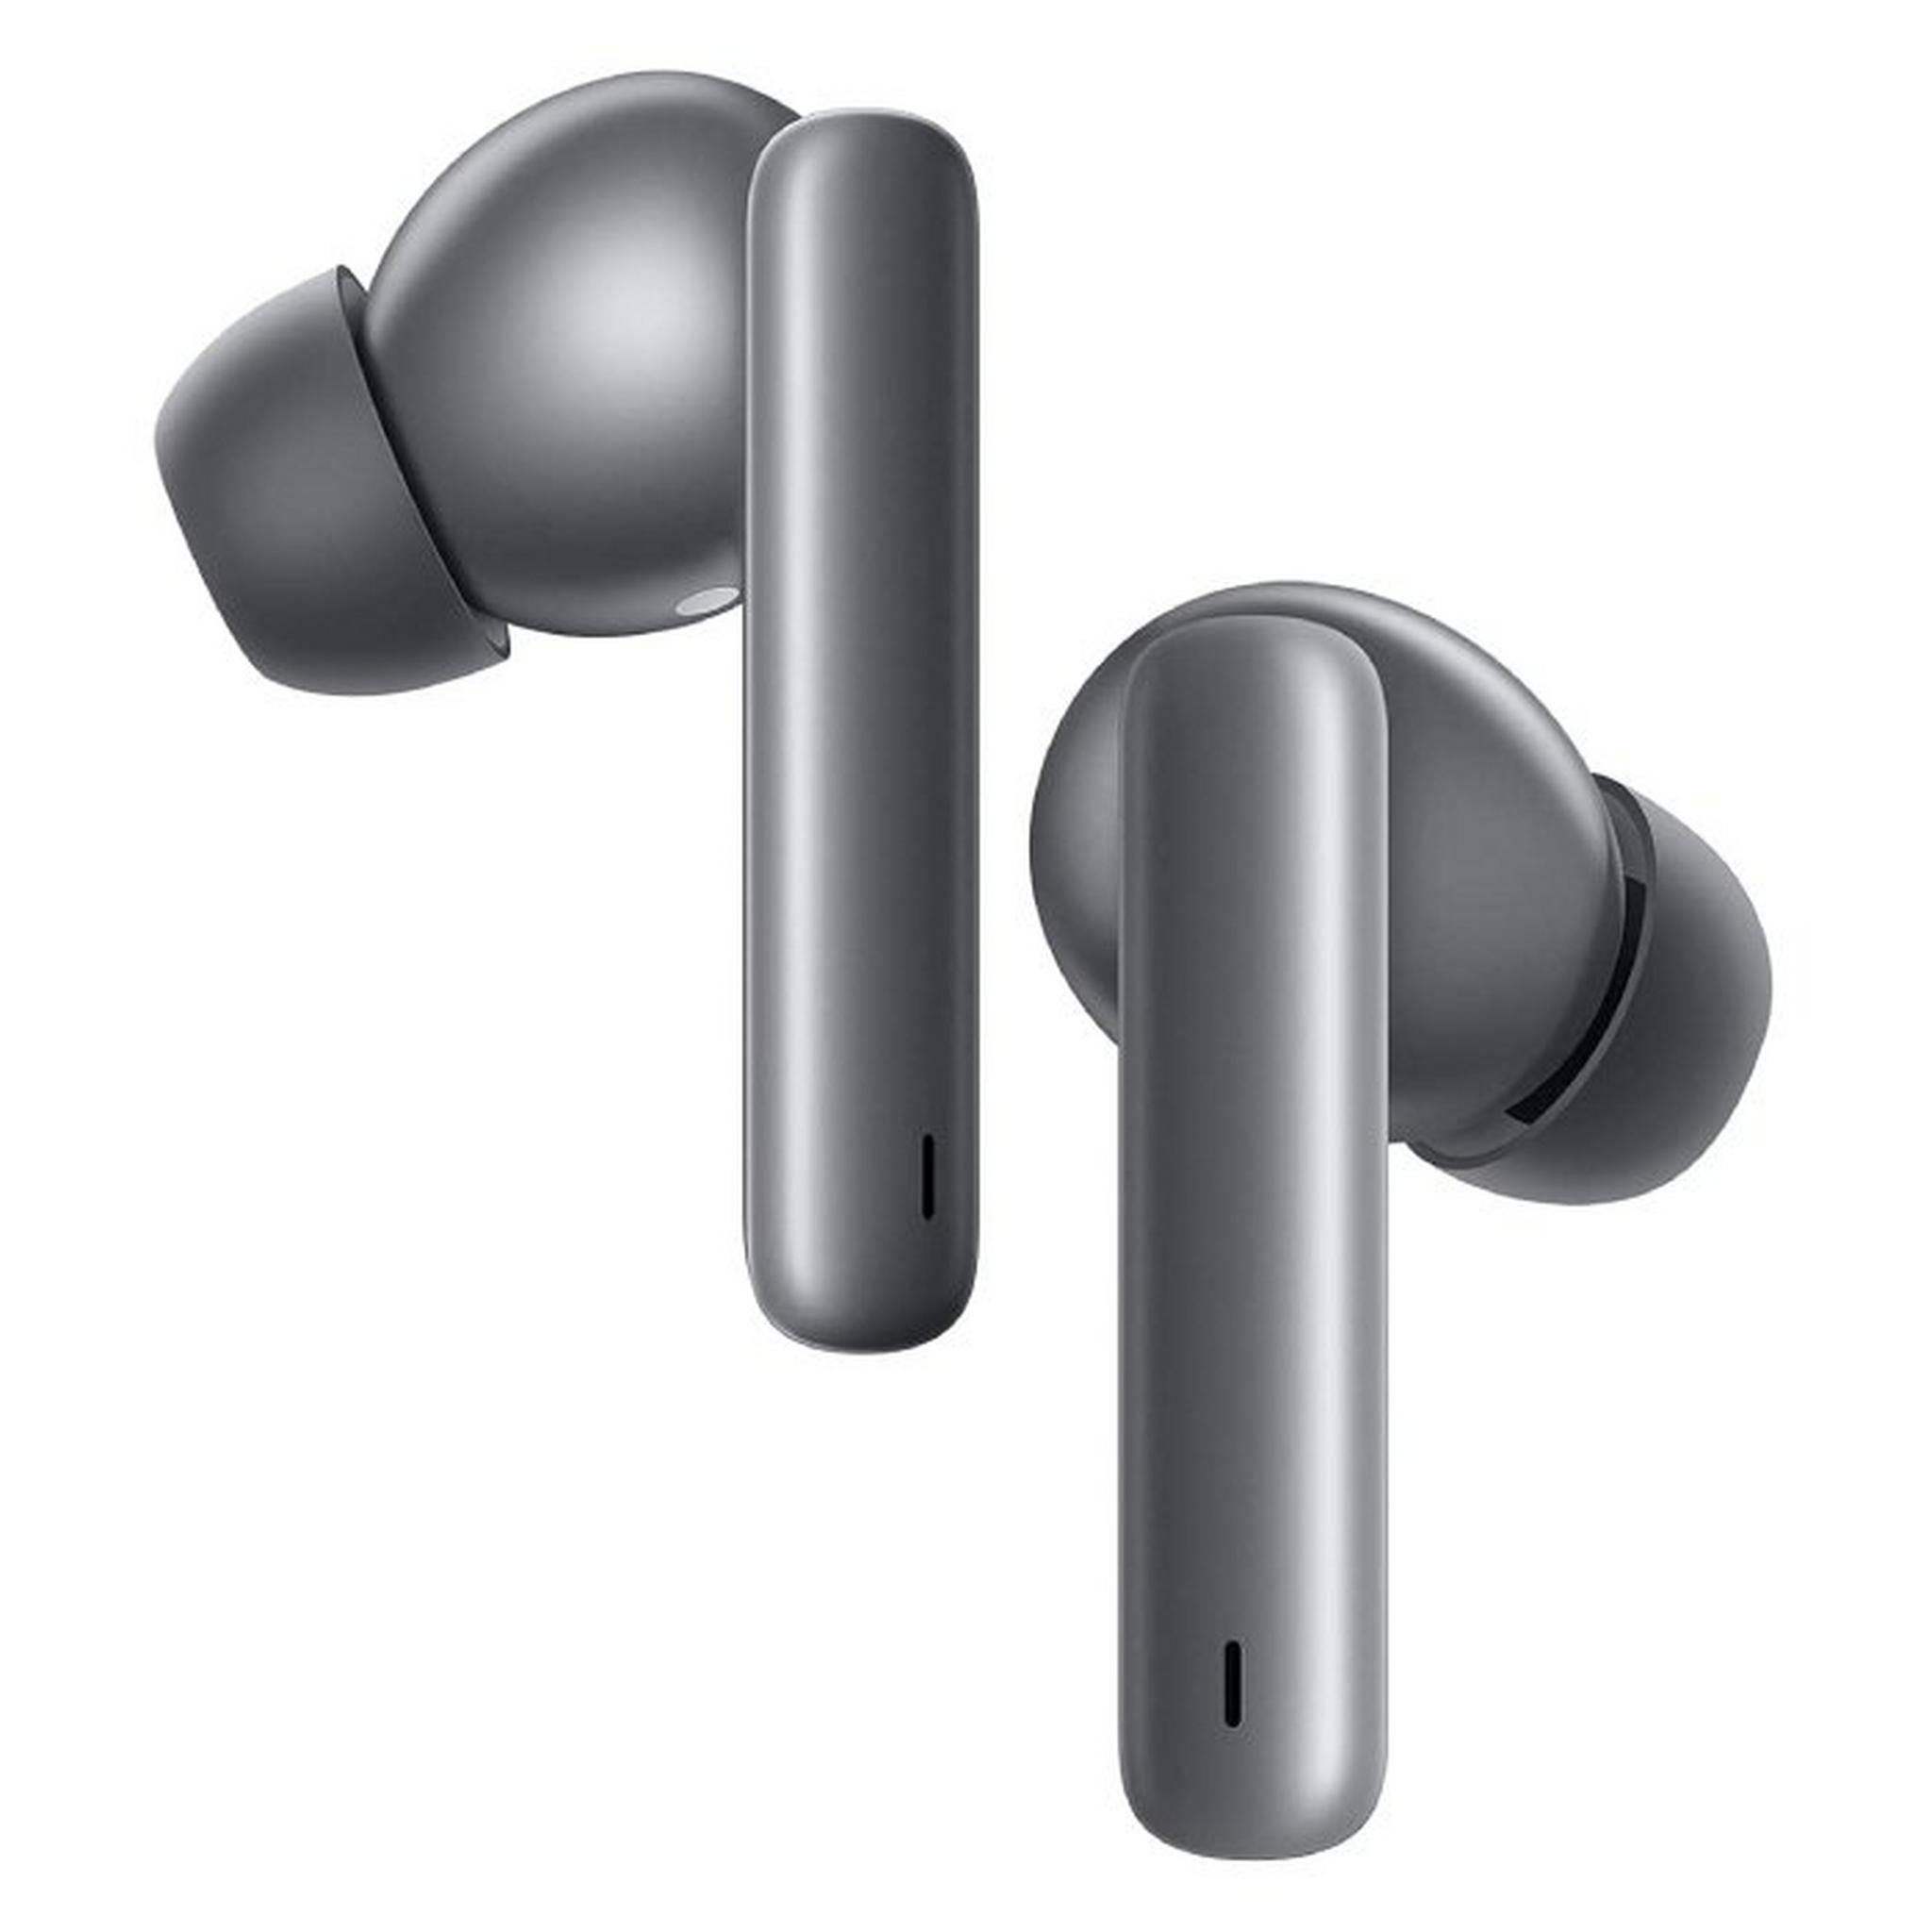 Huawei FreeBuds 4i Noise Cancelling Earphones - Silver